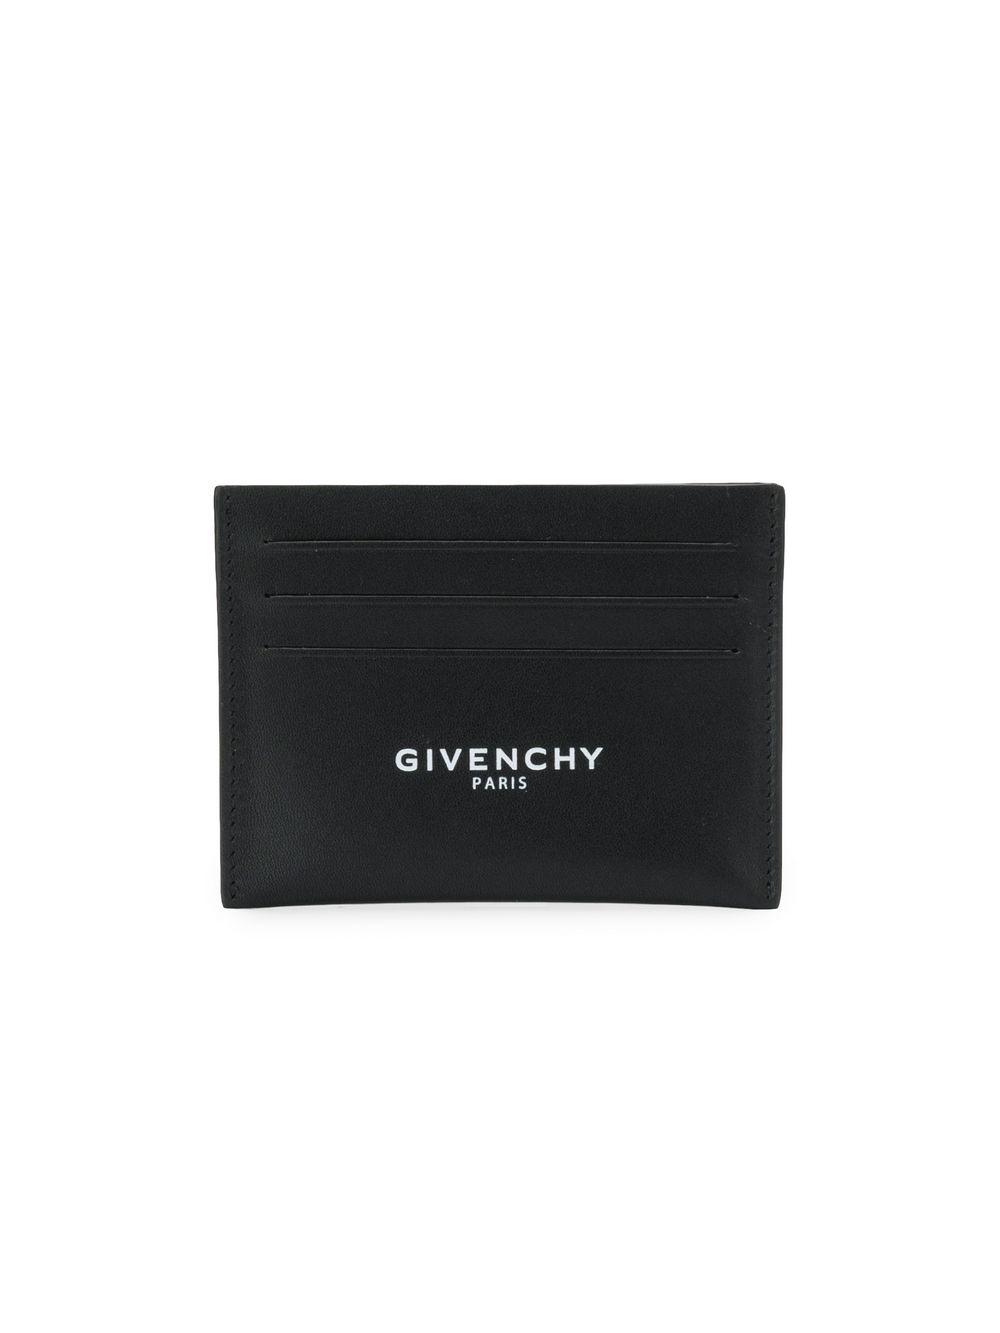 Givenchy Leather Card Holder in Black - Lyst